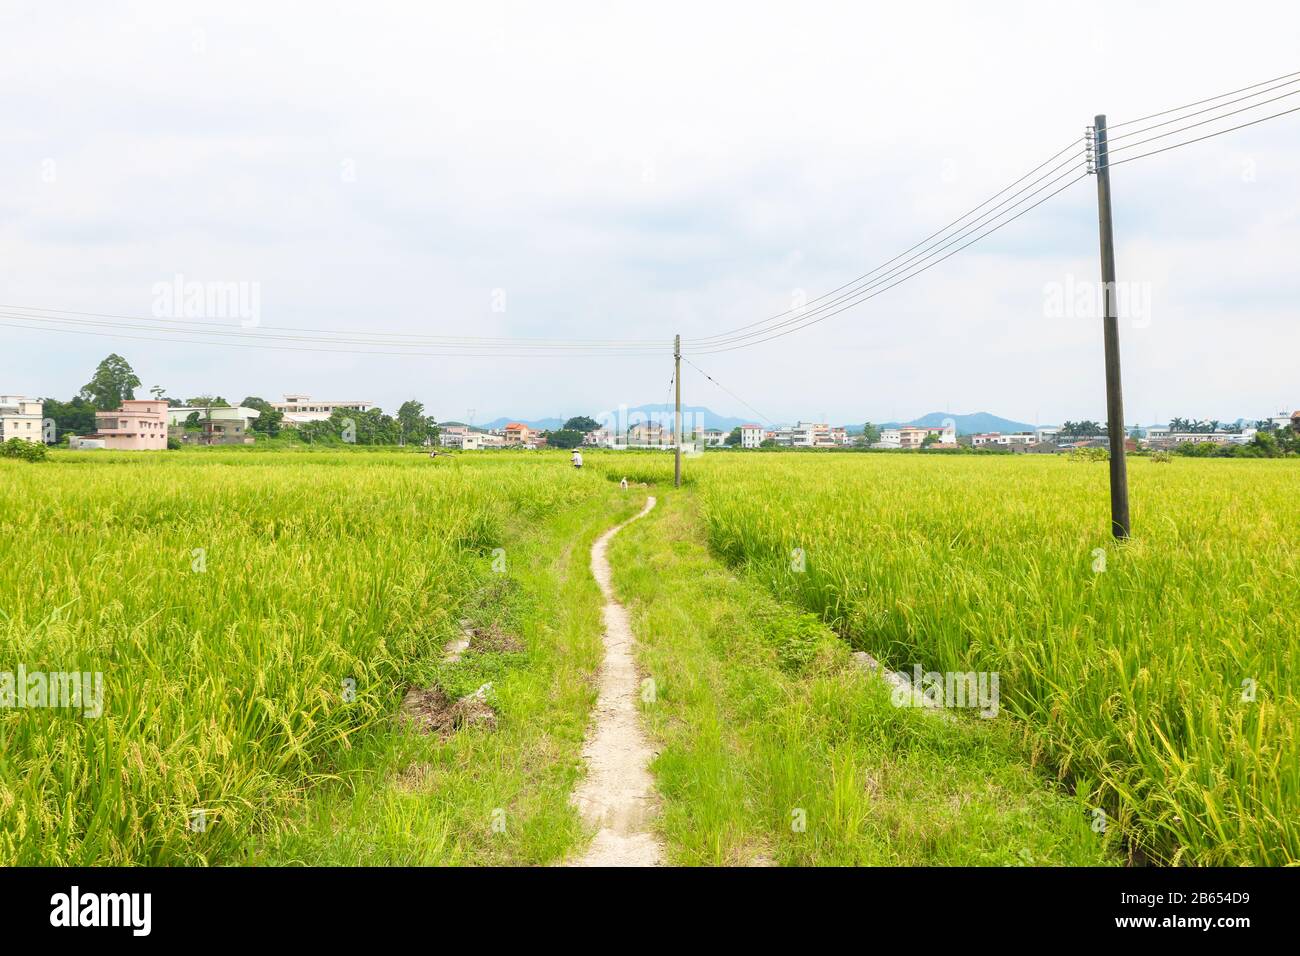 Empty dirt road through the rice paddy field in the village, Xinhui district of Jiangmen, south China's Guangdong province. Stock Photo